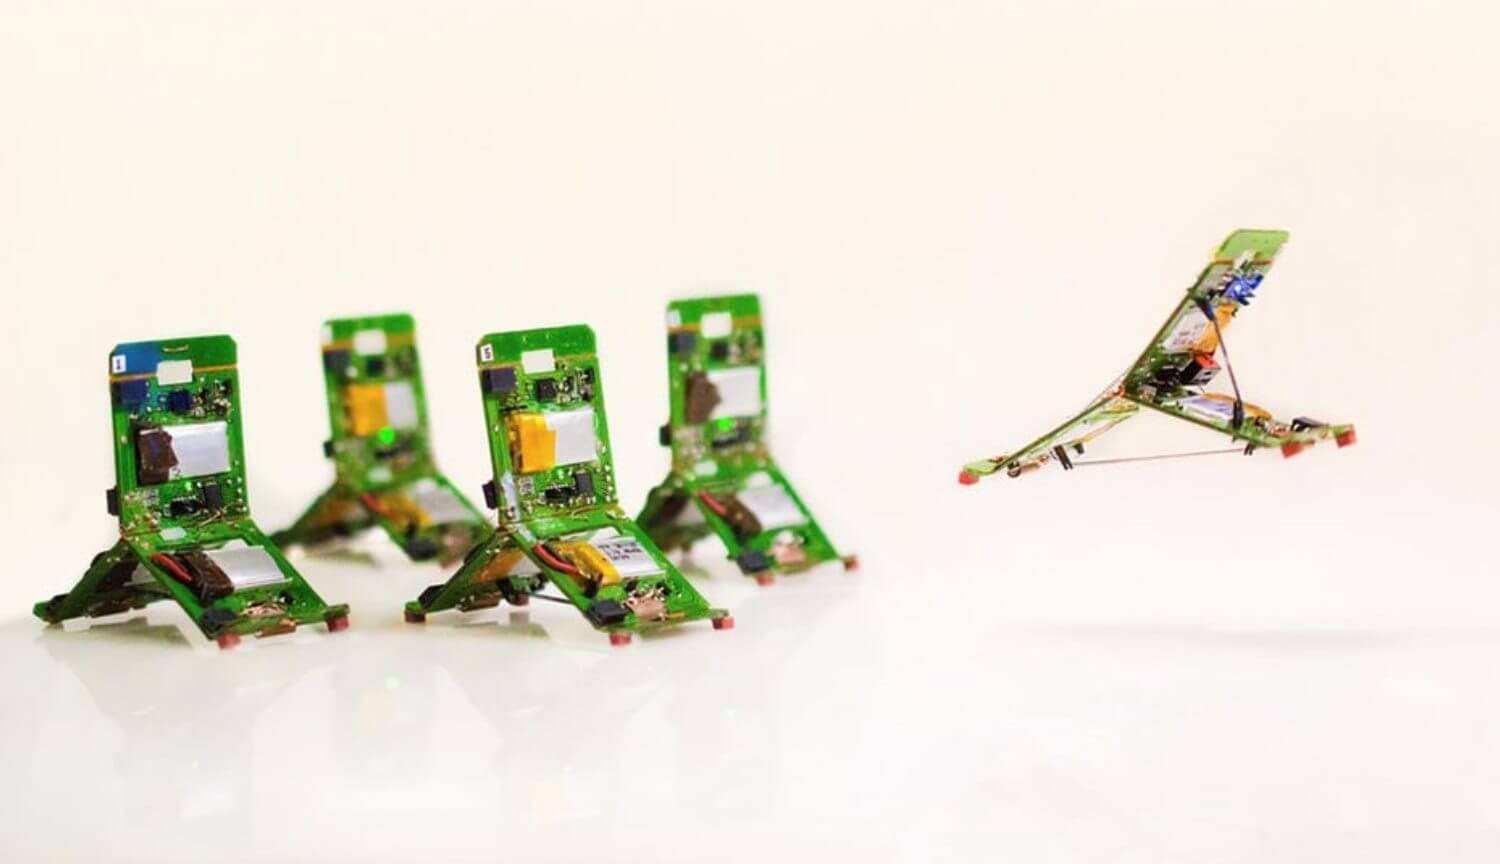 Victims of disasters are saved by the robots, similar to ants